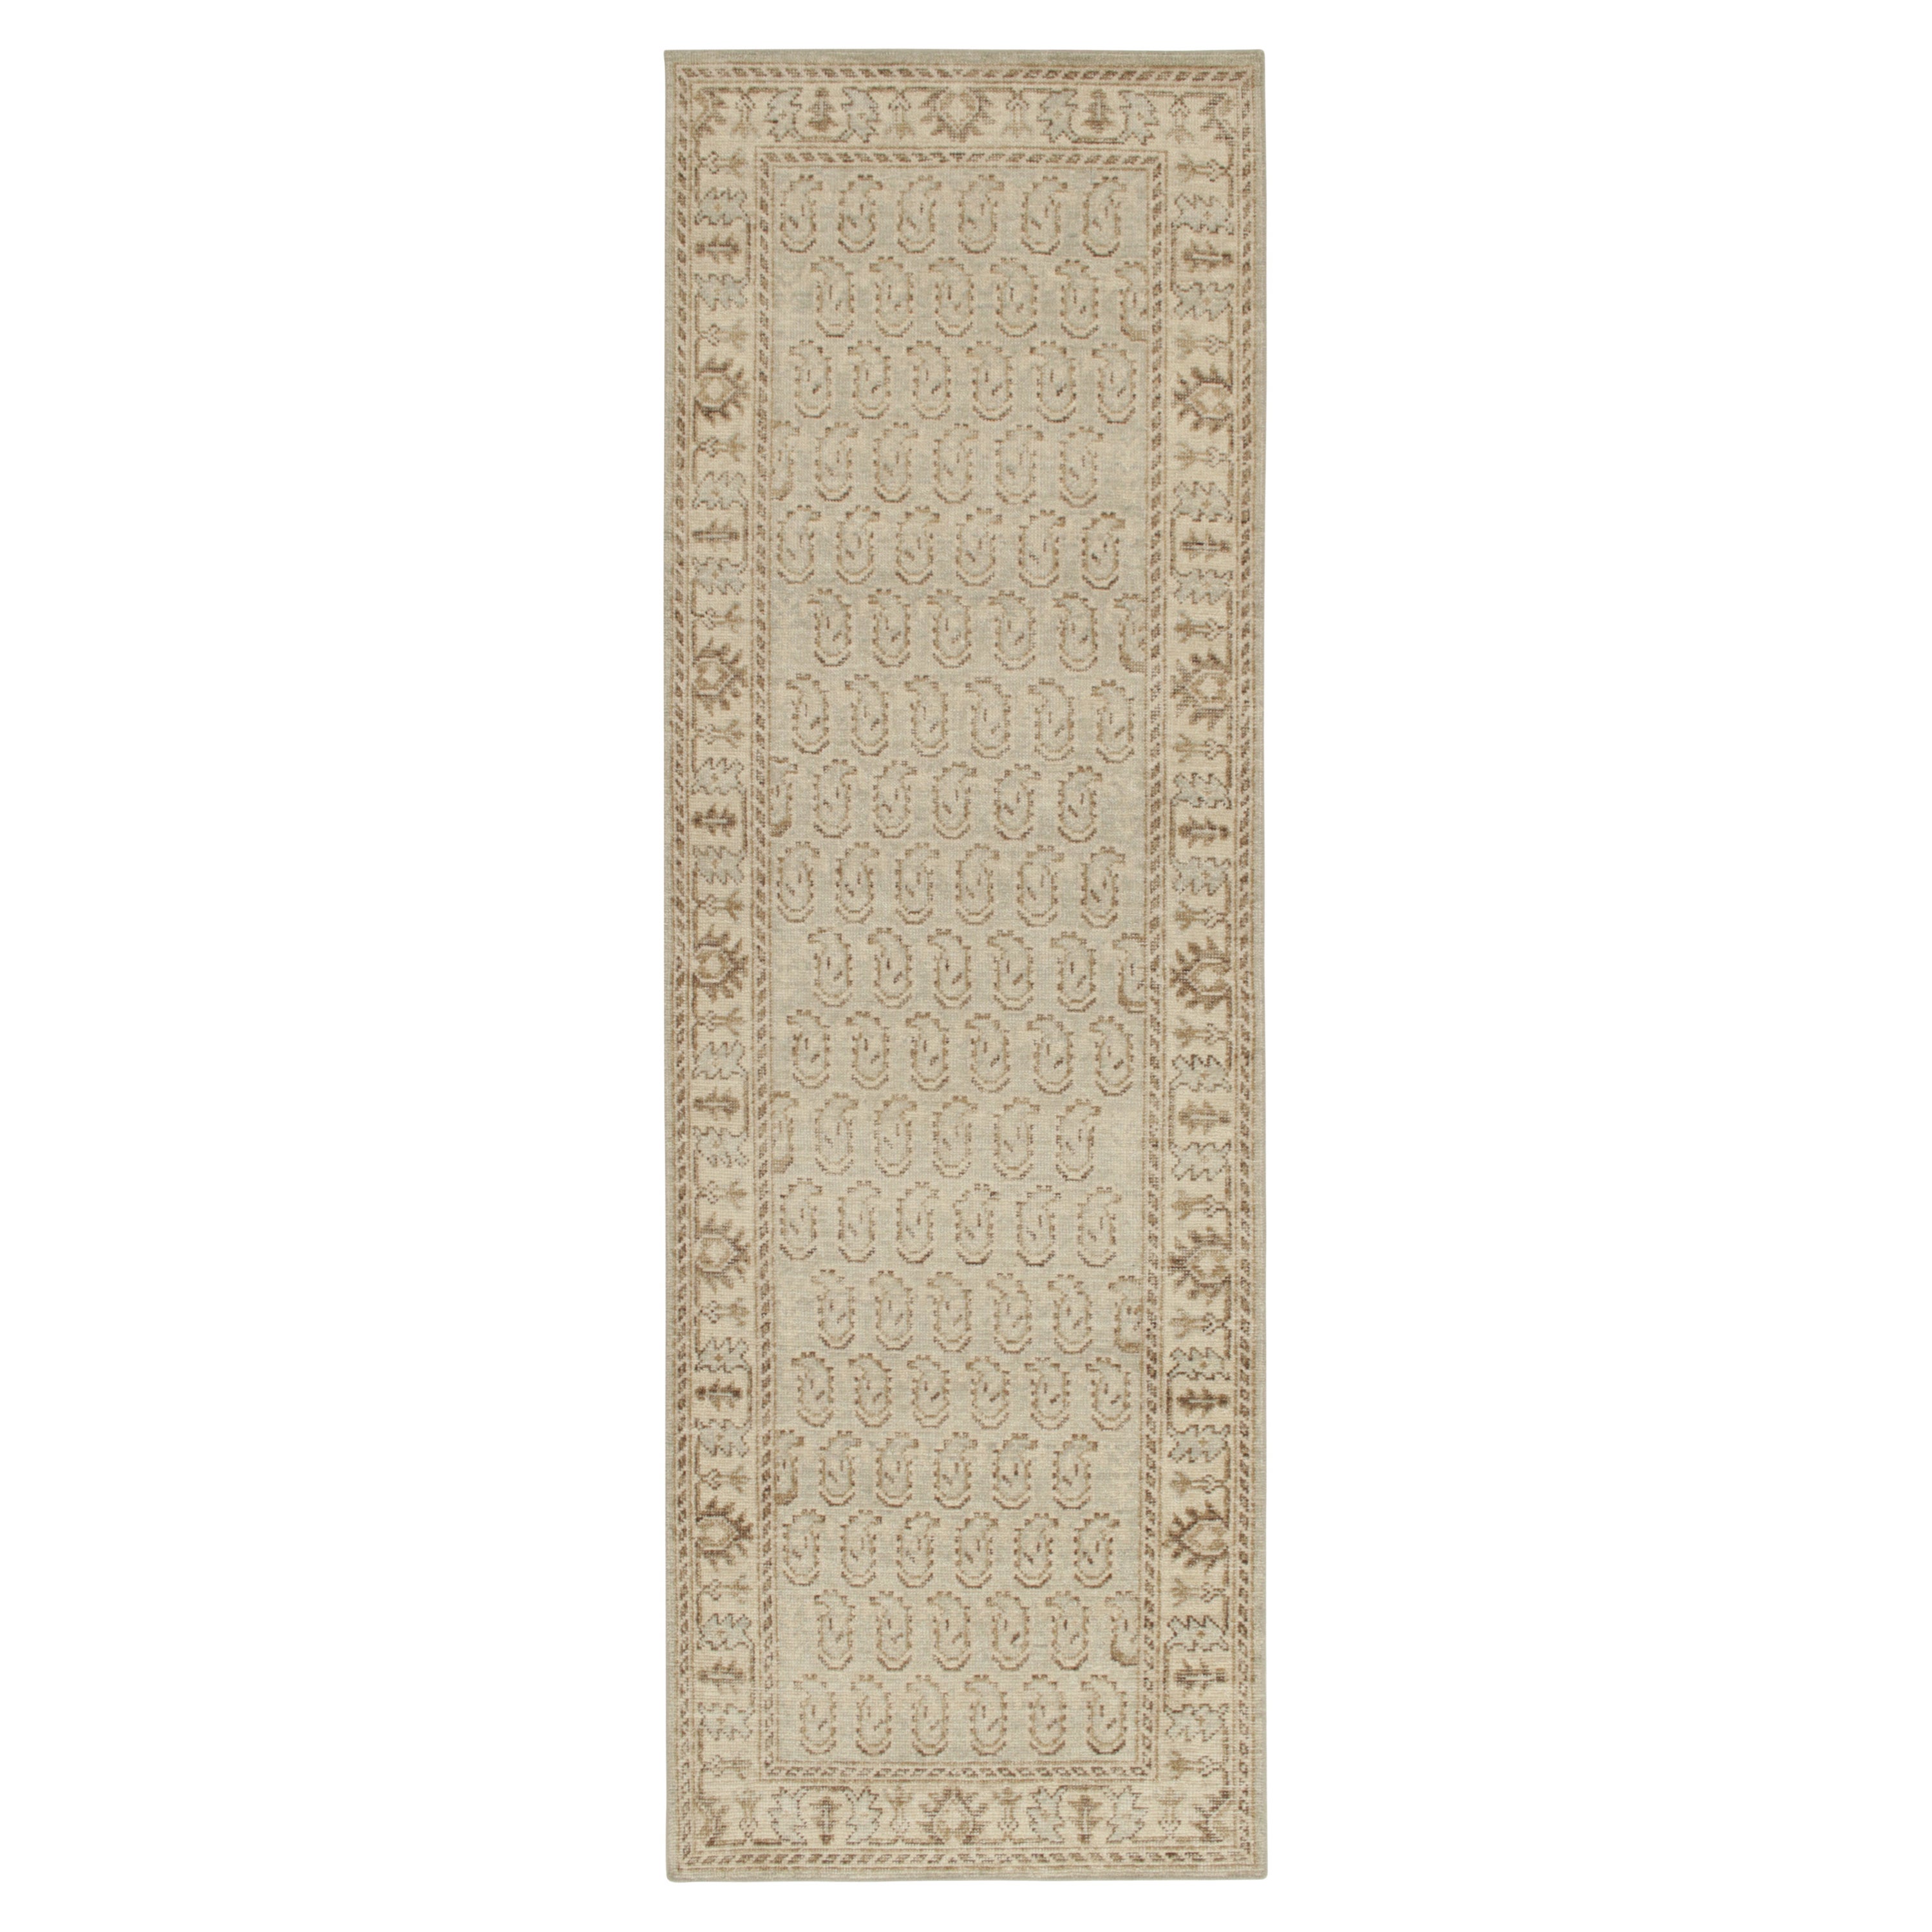 Rug & Kilim’s Tribal Style Runner in Blue with Beige-Brown Paisley Patterns For Sale